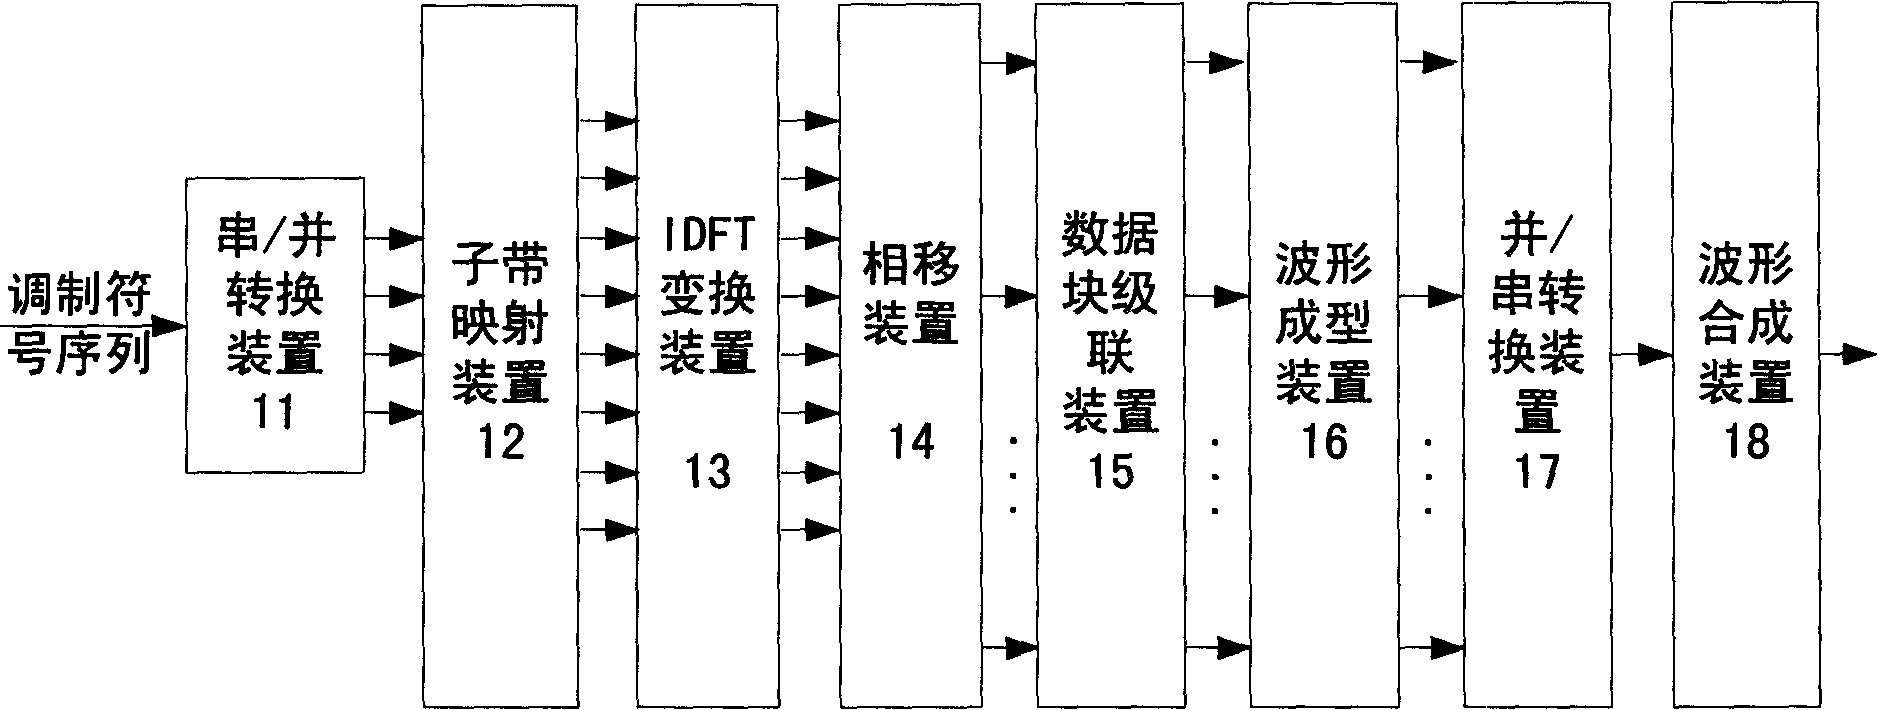 A simple transmission and receiving device and method based on multi-sub band filter groups